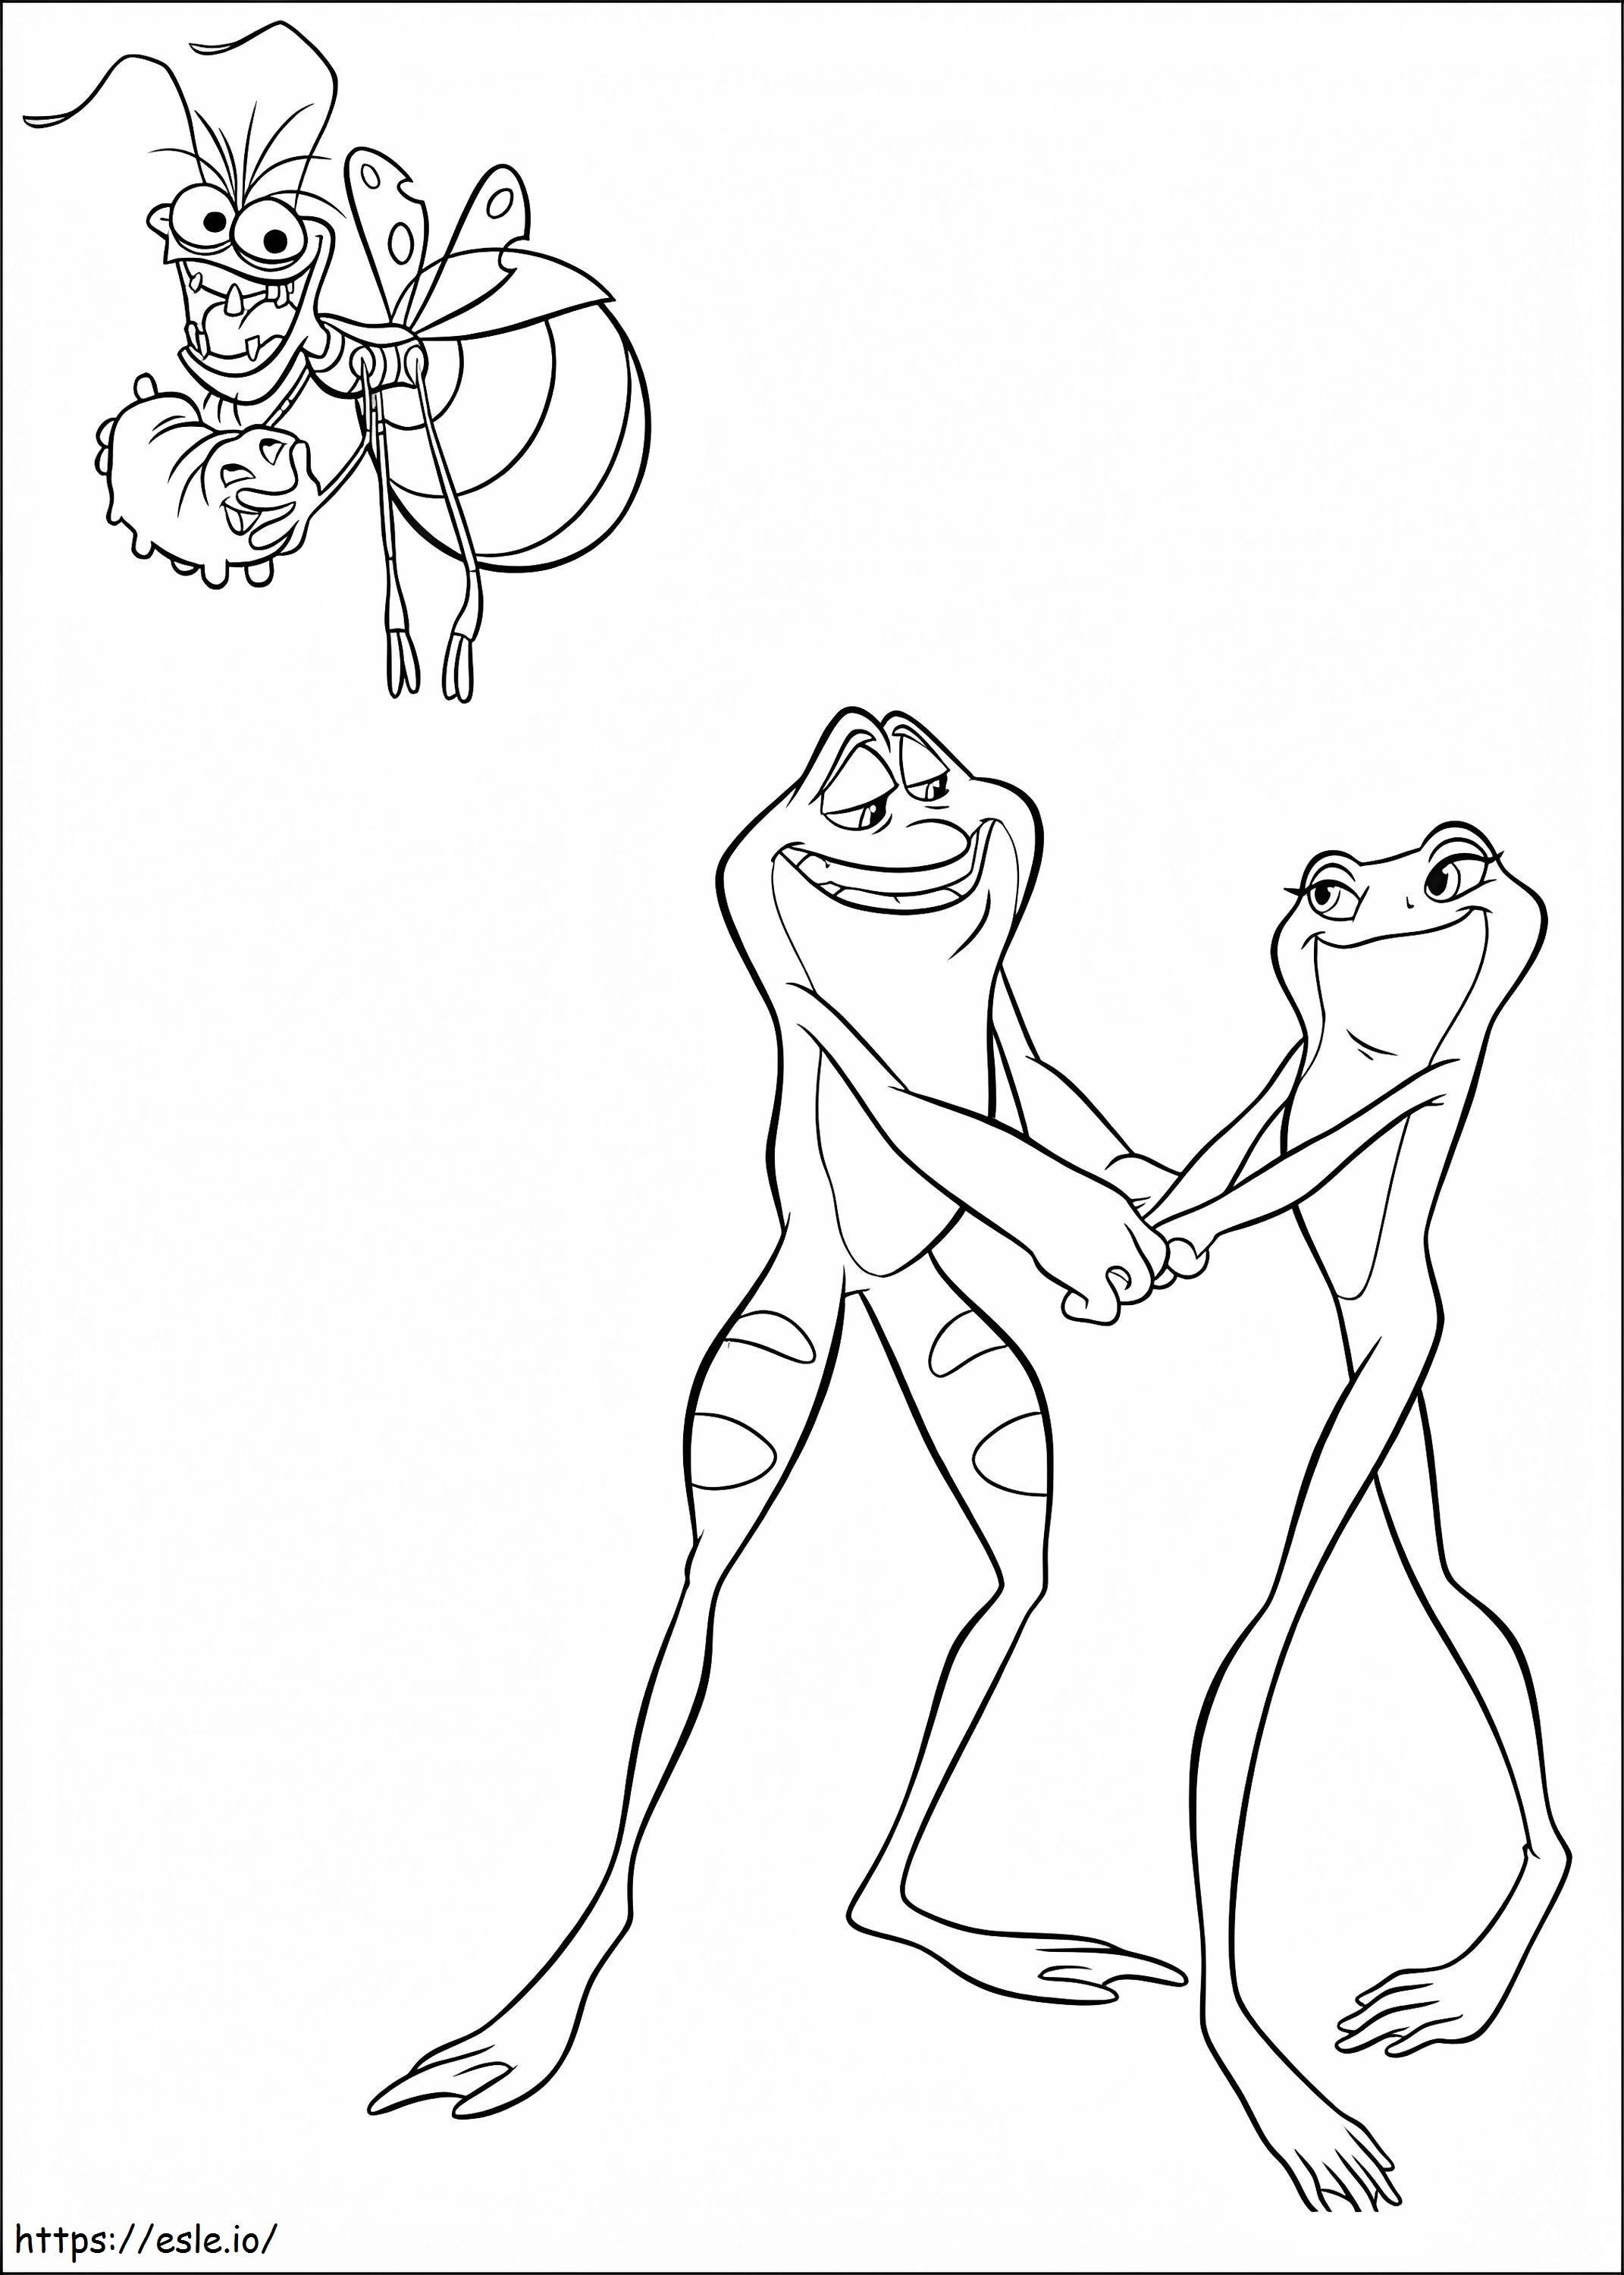 Princess And The Frog Characters coloring page